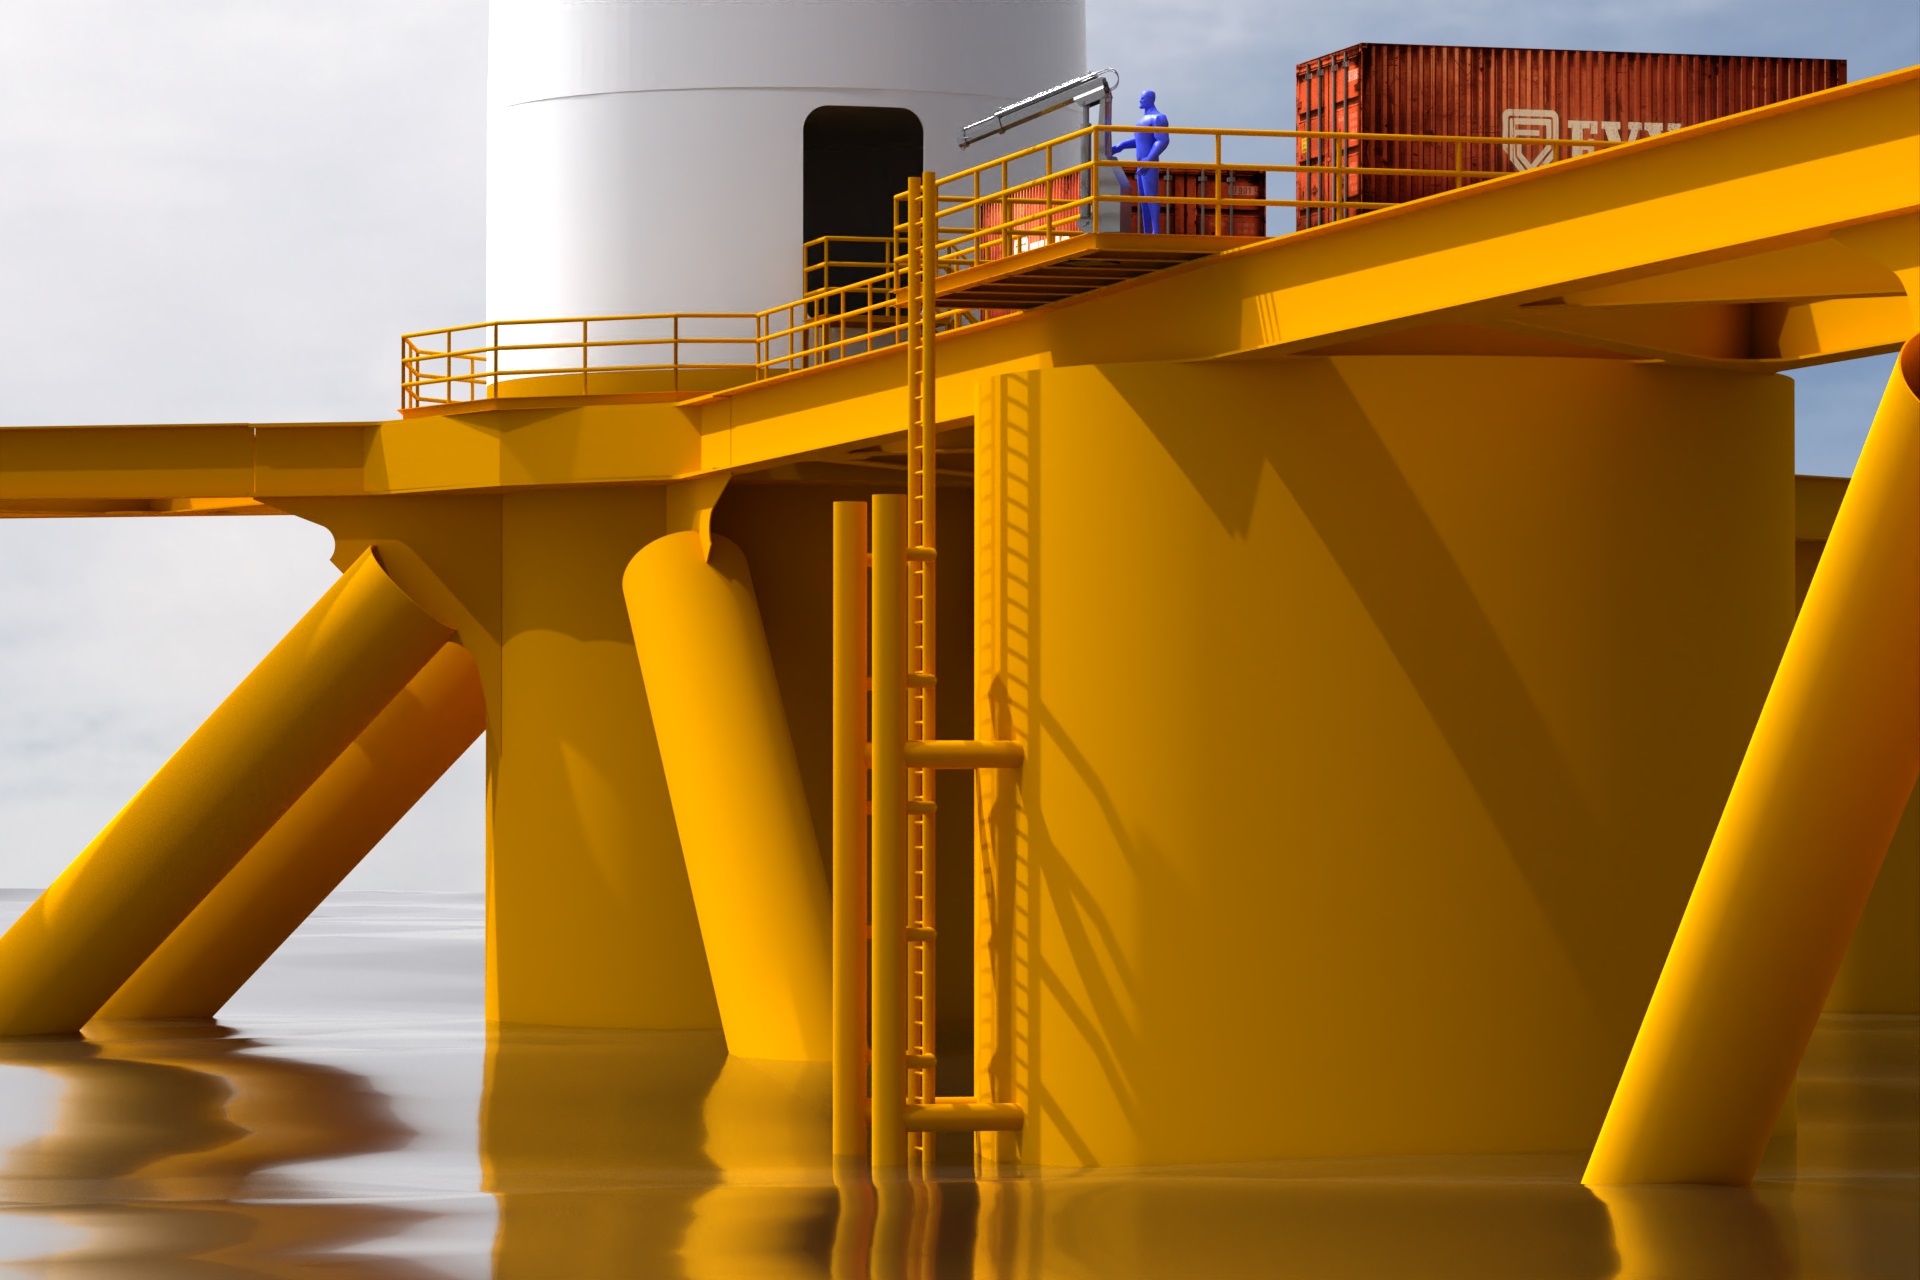 An image rendering Clovers' MOLO floating wind turbine foundation, close-up